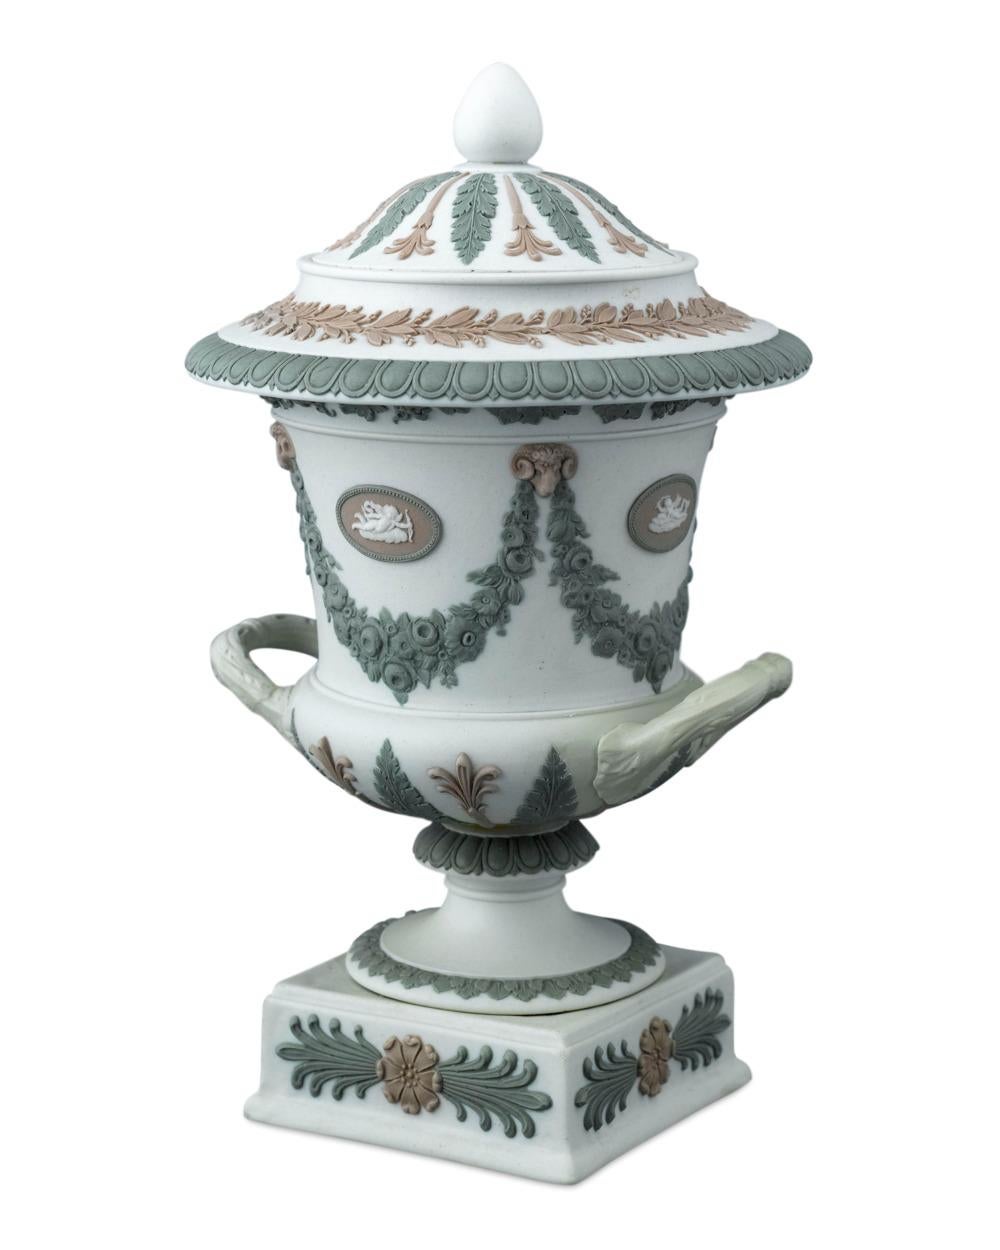 This exceptional and rare Wedgwood tri-colored jasper vase exemplifies that renowned firm’s classical artistry. Crafted of jasper, perhaps the greatest of Josiah Wedgwood’s porcelain innovations, in the shape of an ancient Greek calyx krater vase,